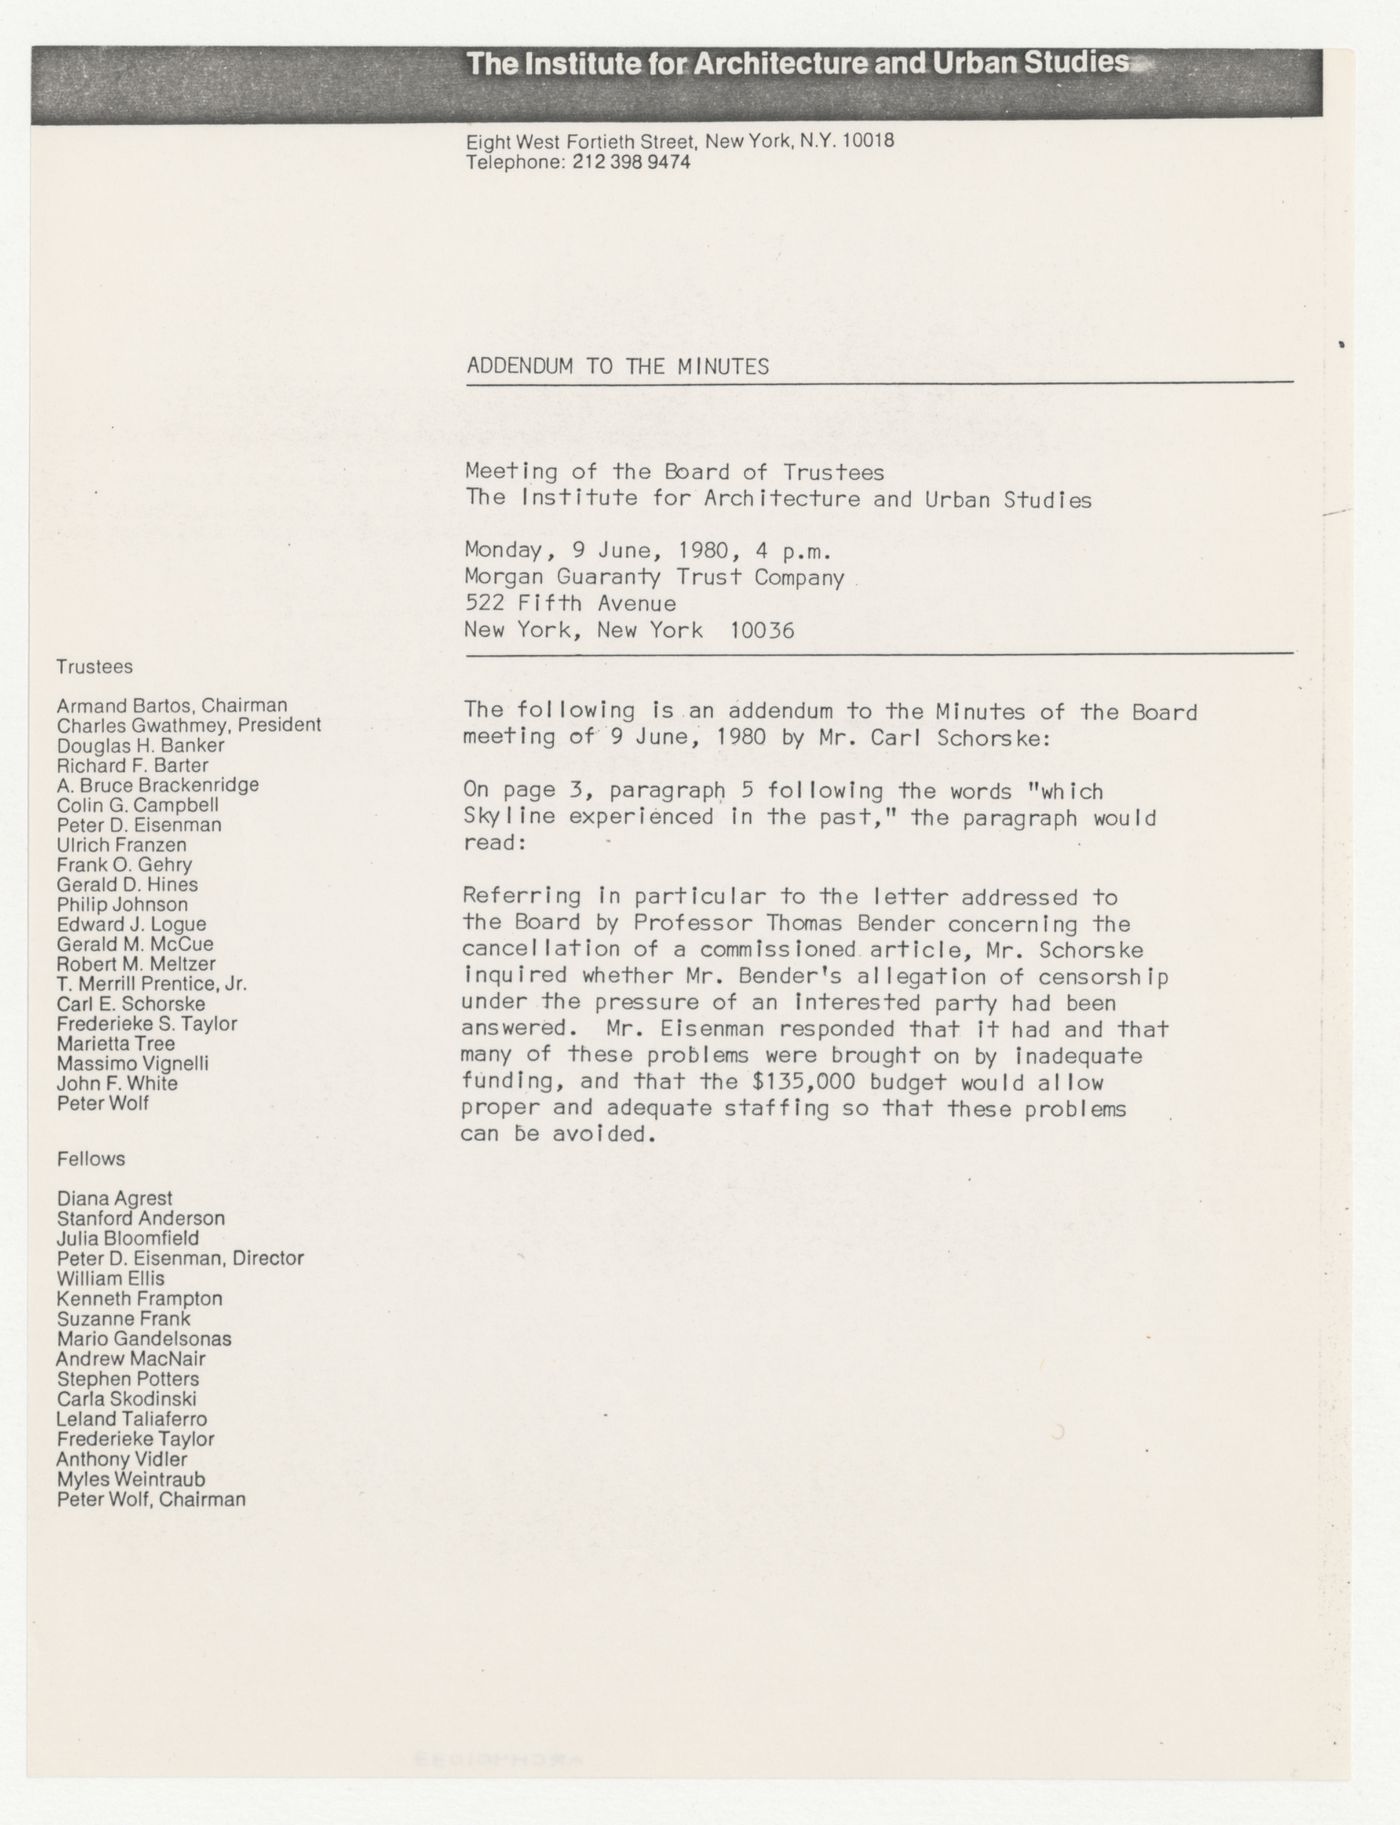 Addendum to the minutes of the meeting of the Board of Trustees of June 9th 1980